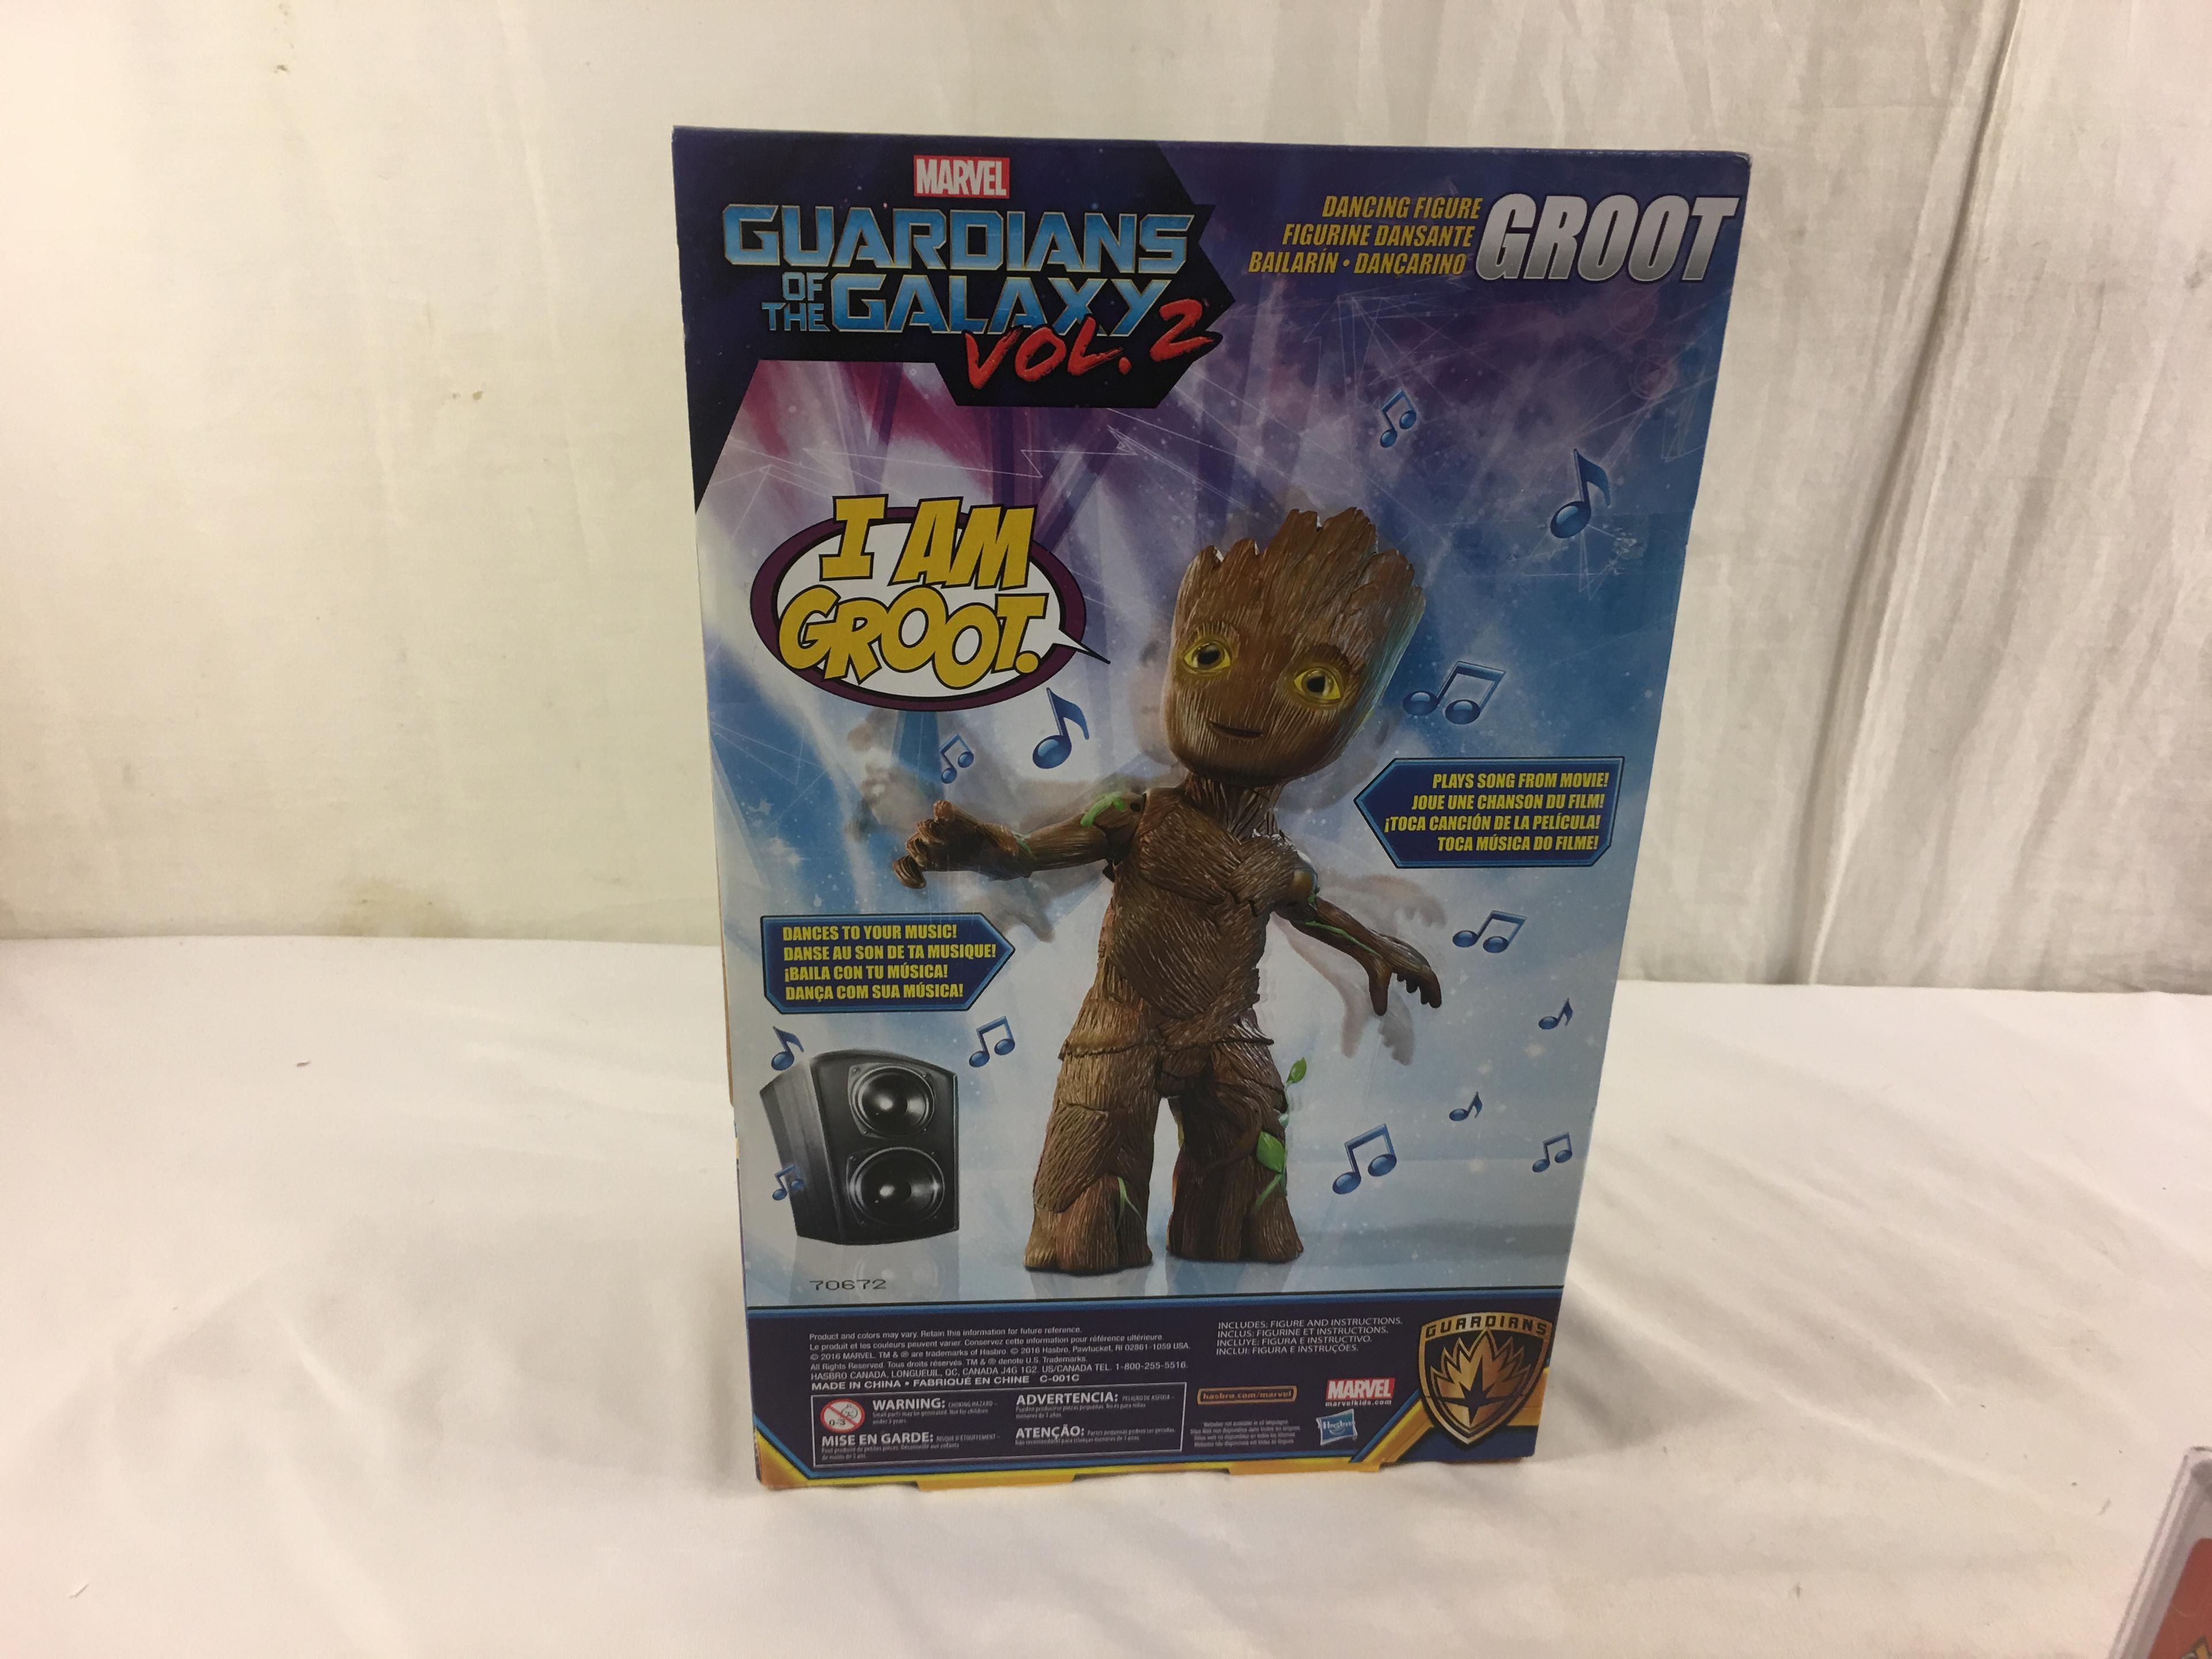 NWT Collector Marvel Guardians Of The Galaxy Dancing Figure Hasbri "GROOT" Size: 12.5"Tall